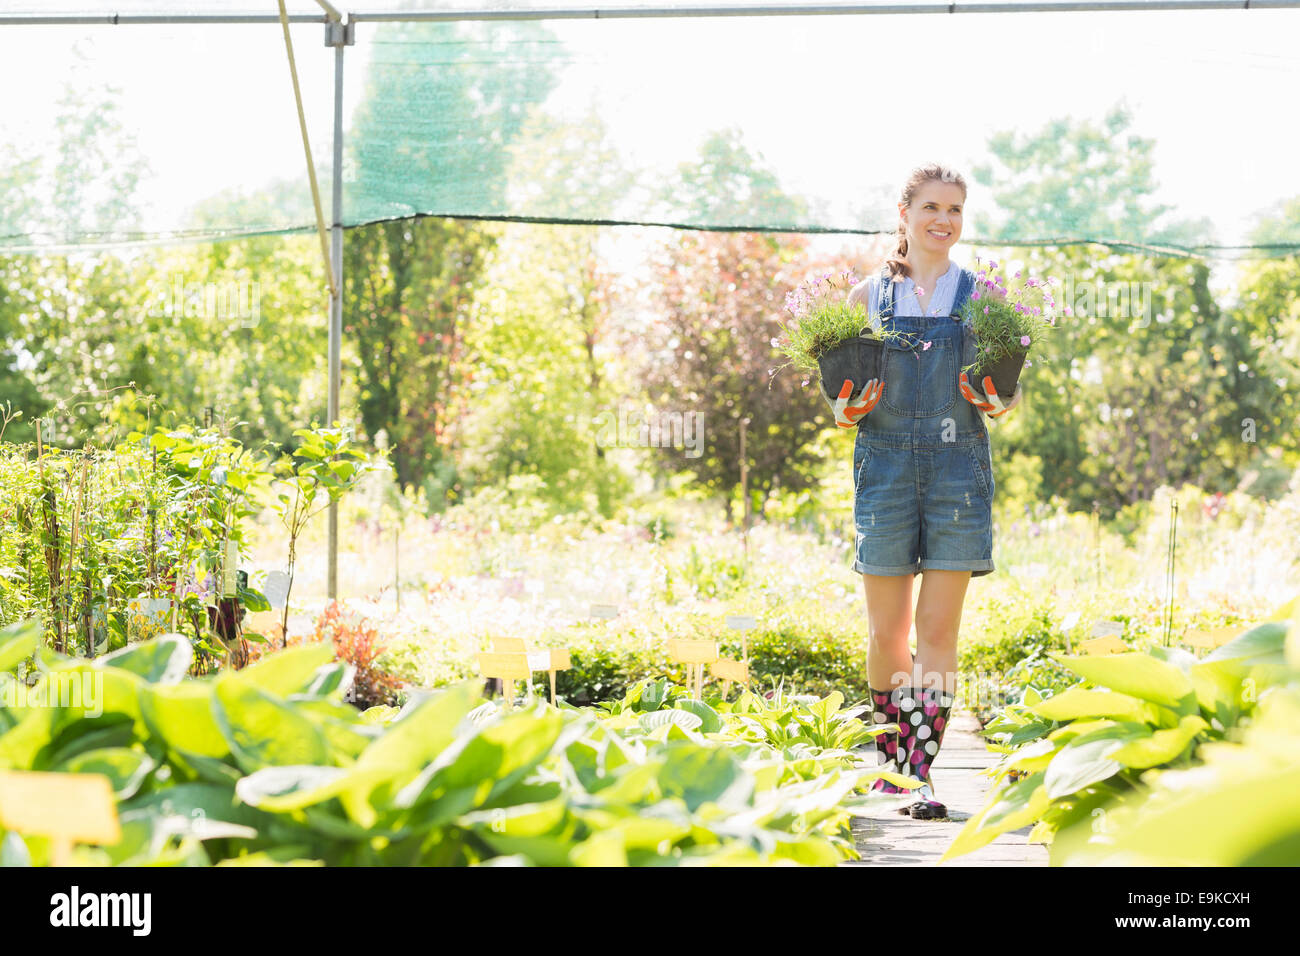 Full-length of gardener looking away while holding potted plants at greenhouse Stock Photo